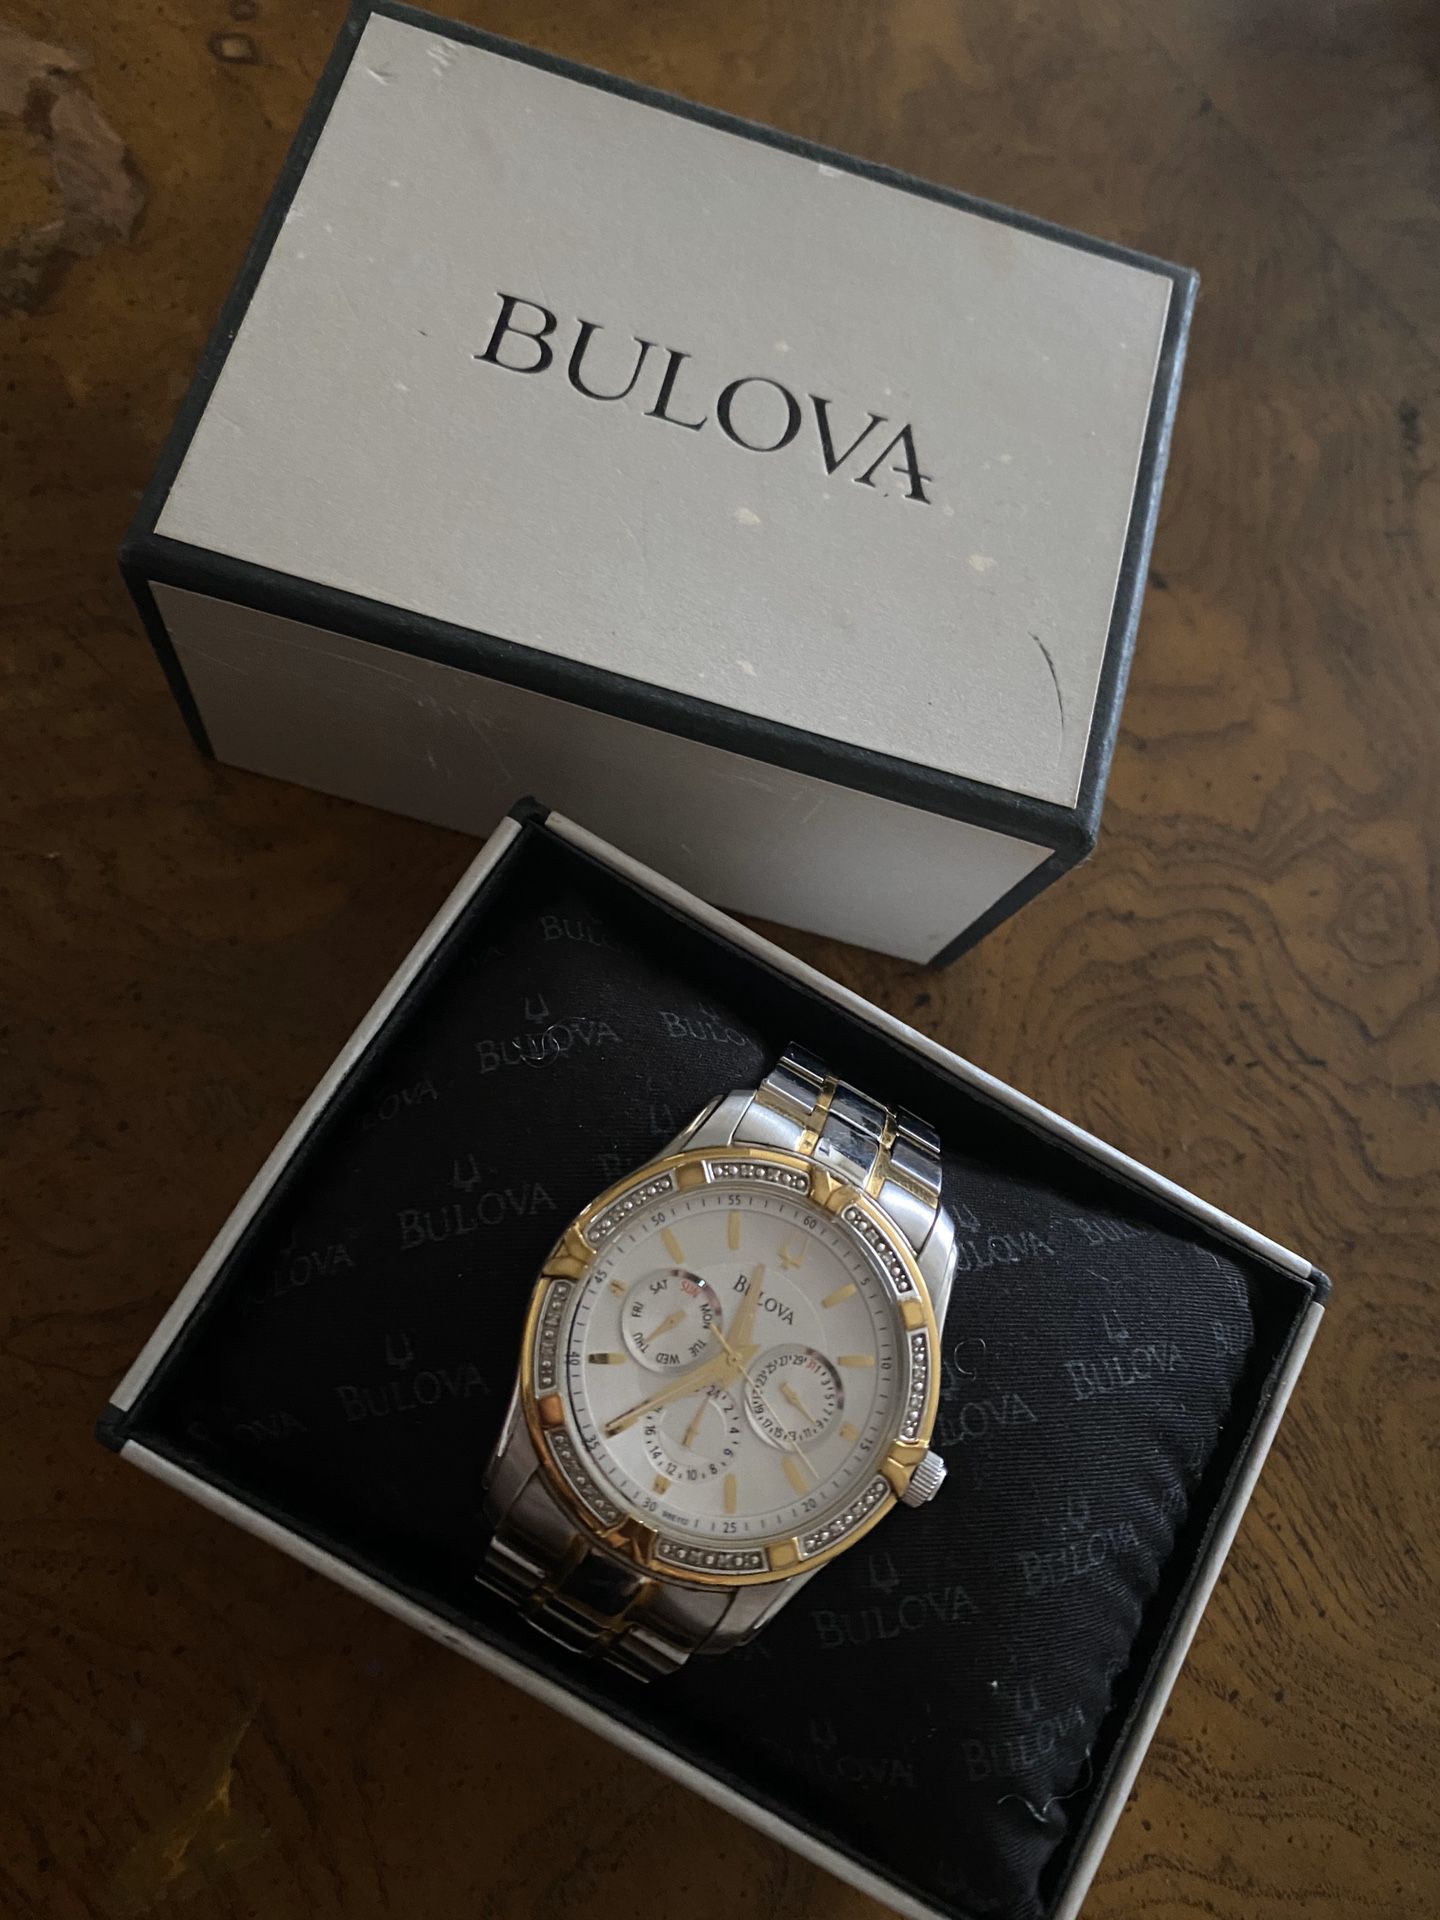 Bulova watch for 250 paid 600 for it new